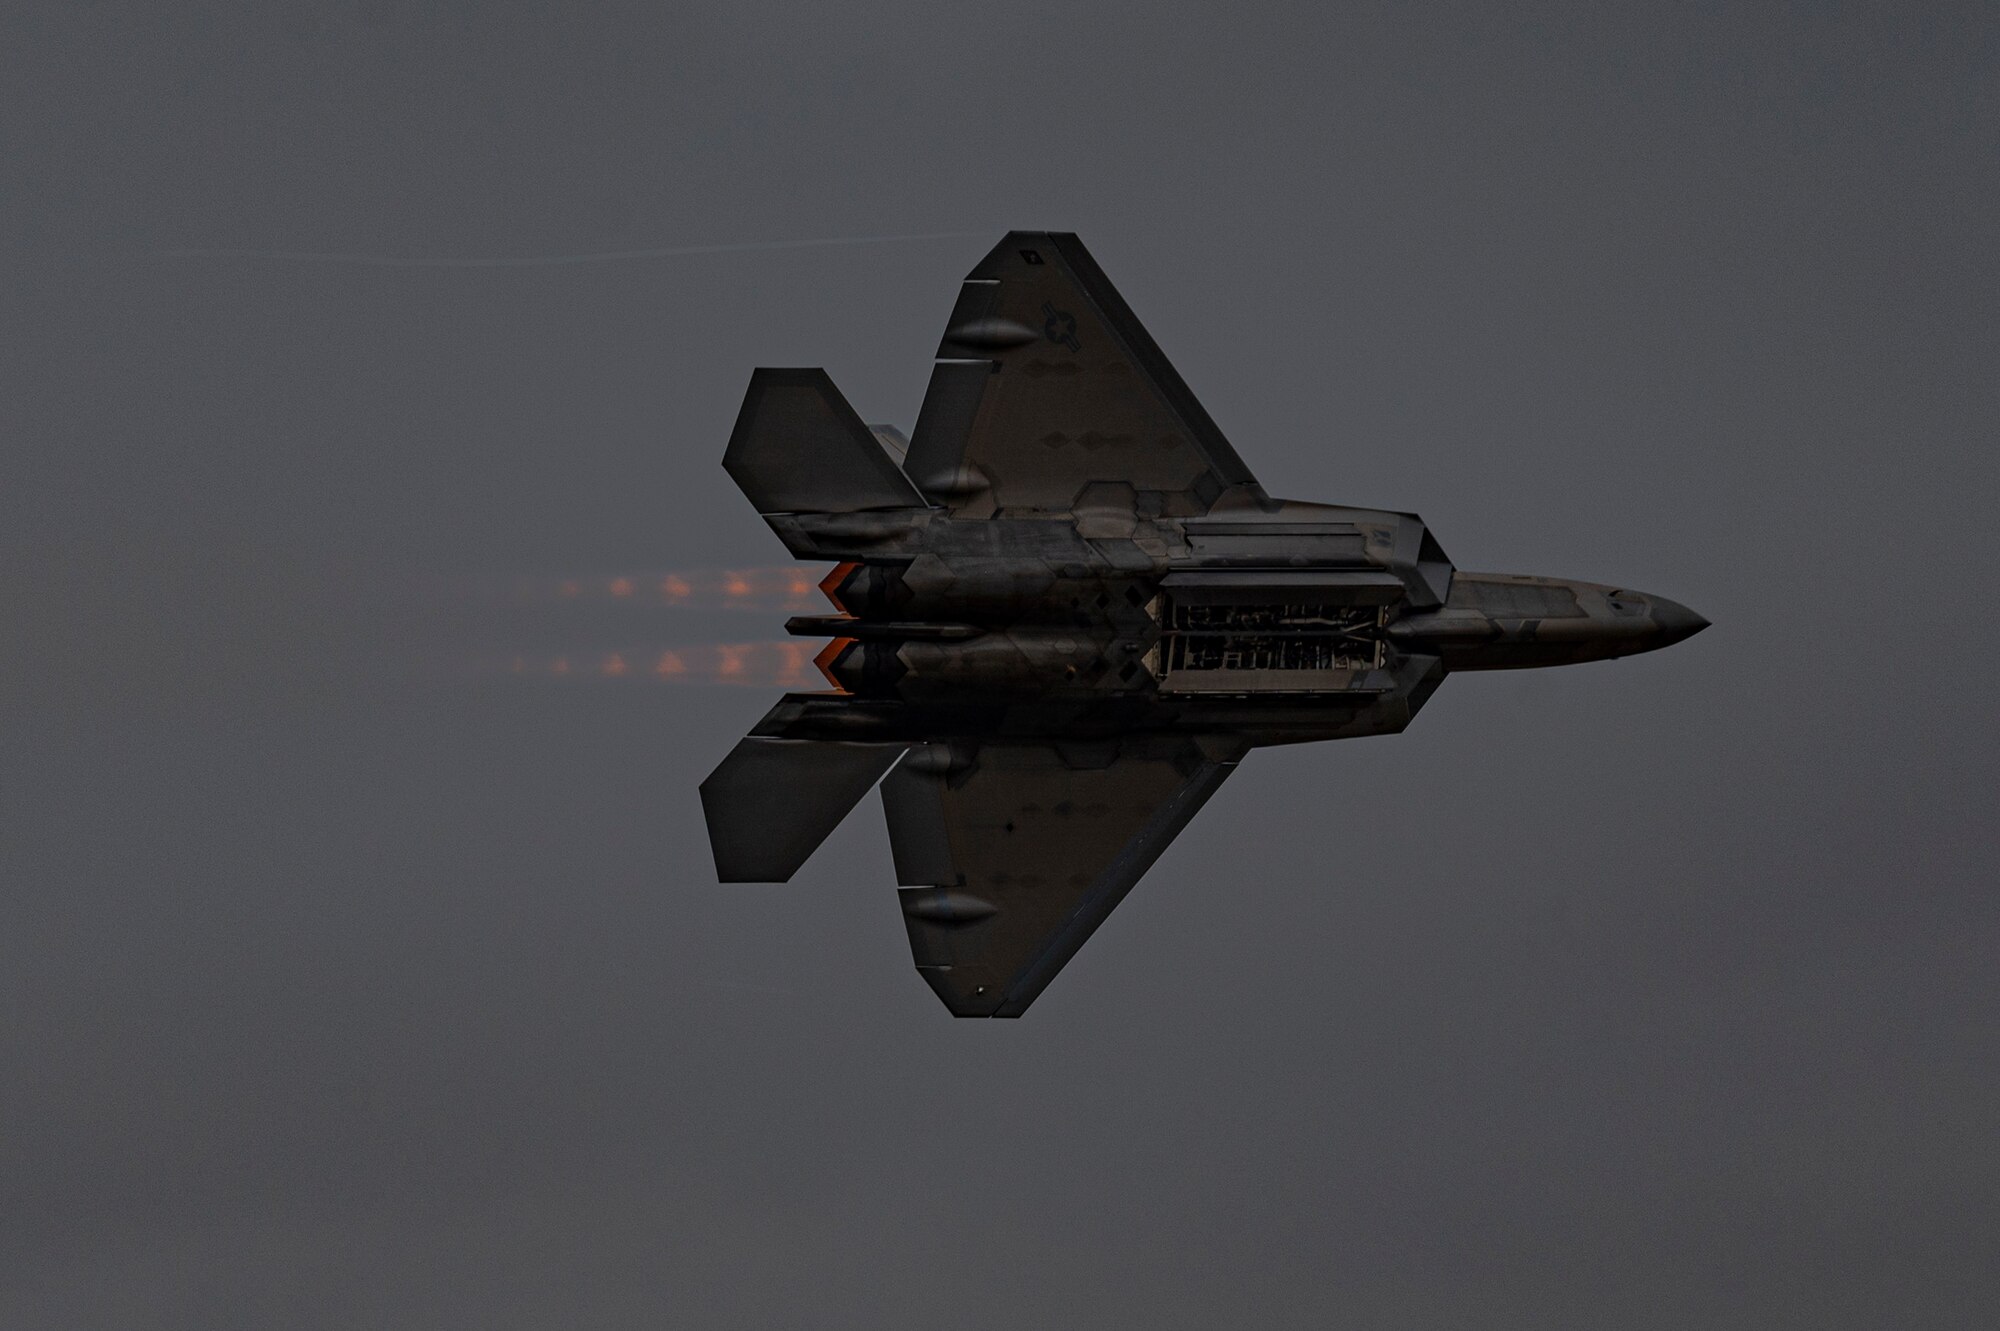 The F-22 Raptor demo team performs during the 2023 Dyess Big Country Air Fest on Dyess Air Force Base, Texas, April 22, 2023. More than 30,000 event goers attended the one-day event highlighting the best of America’s only Lift and Strike base, Air Force heritage and Dyess community partners. The air show featured the F-22 Raptor demo team, U.S. Air Force Academy Wings of Blue, U.S. Army Golden Knights, WWII heritage flight and B-1B Lancer and C-130J Super Hercules fly overs. (U.S. Air Force photo by Senior Airman Josiah Brown)